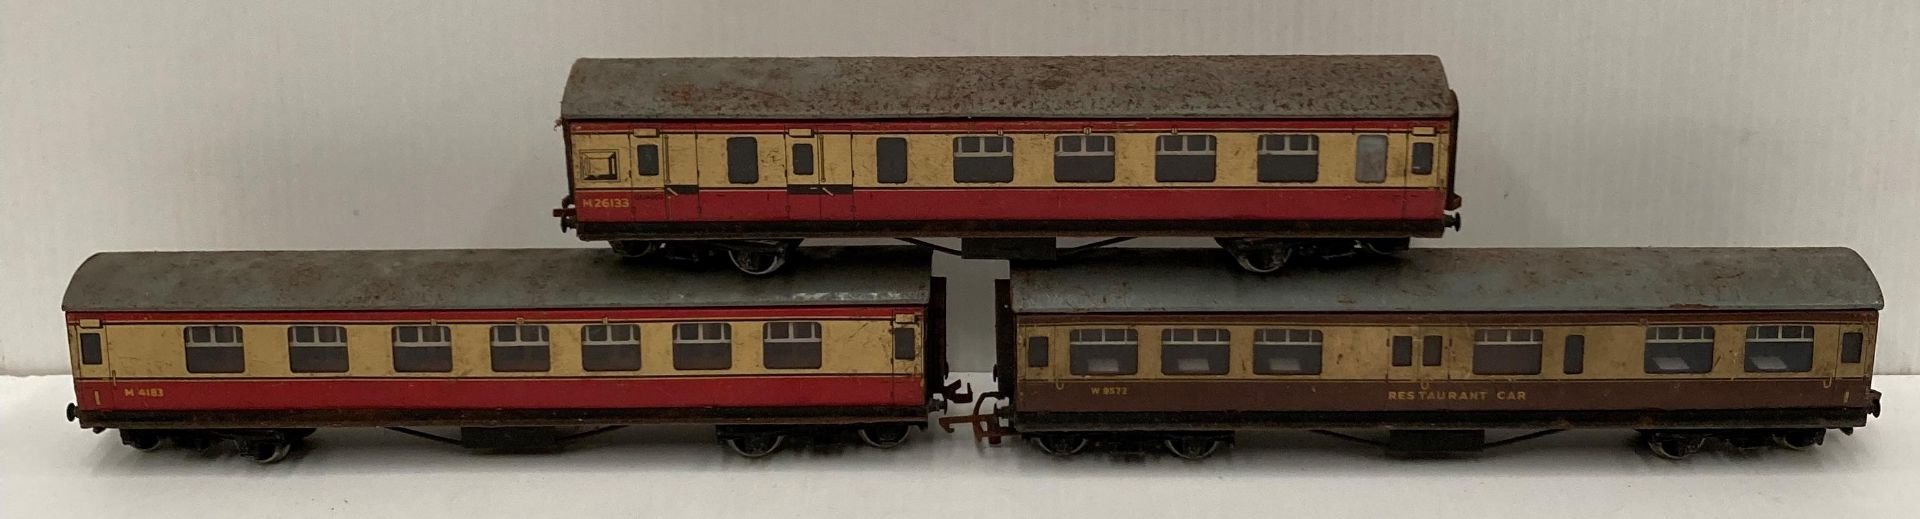 Seven assorted Hornby Dublo by Meccano diecast metal "OO" gauge "Steam Locomotive" type EDL17 a - Image 2 of 3